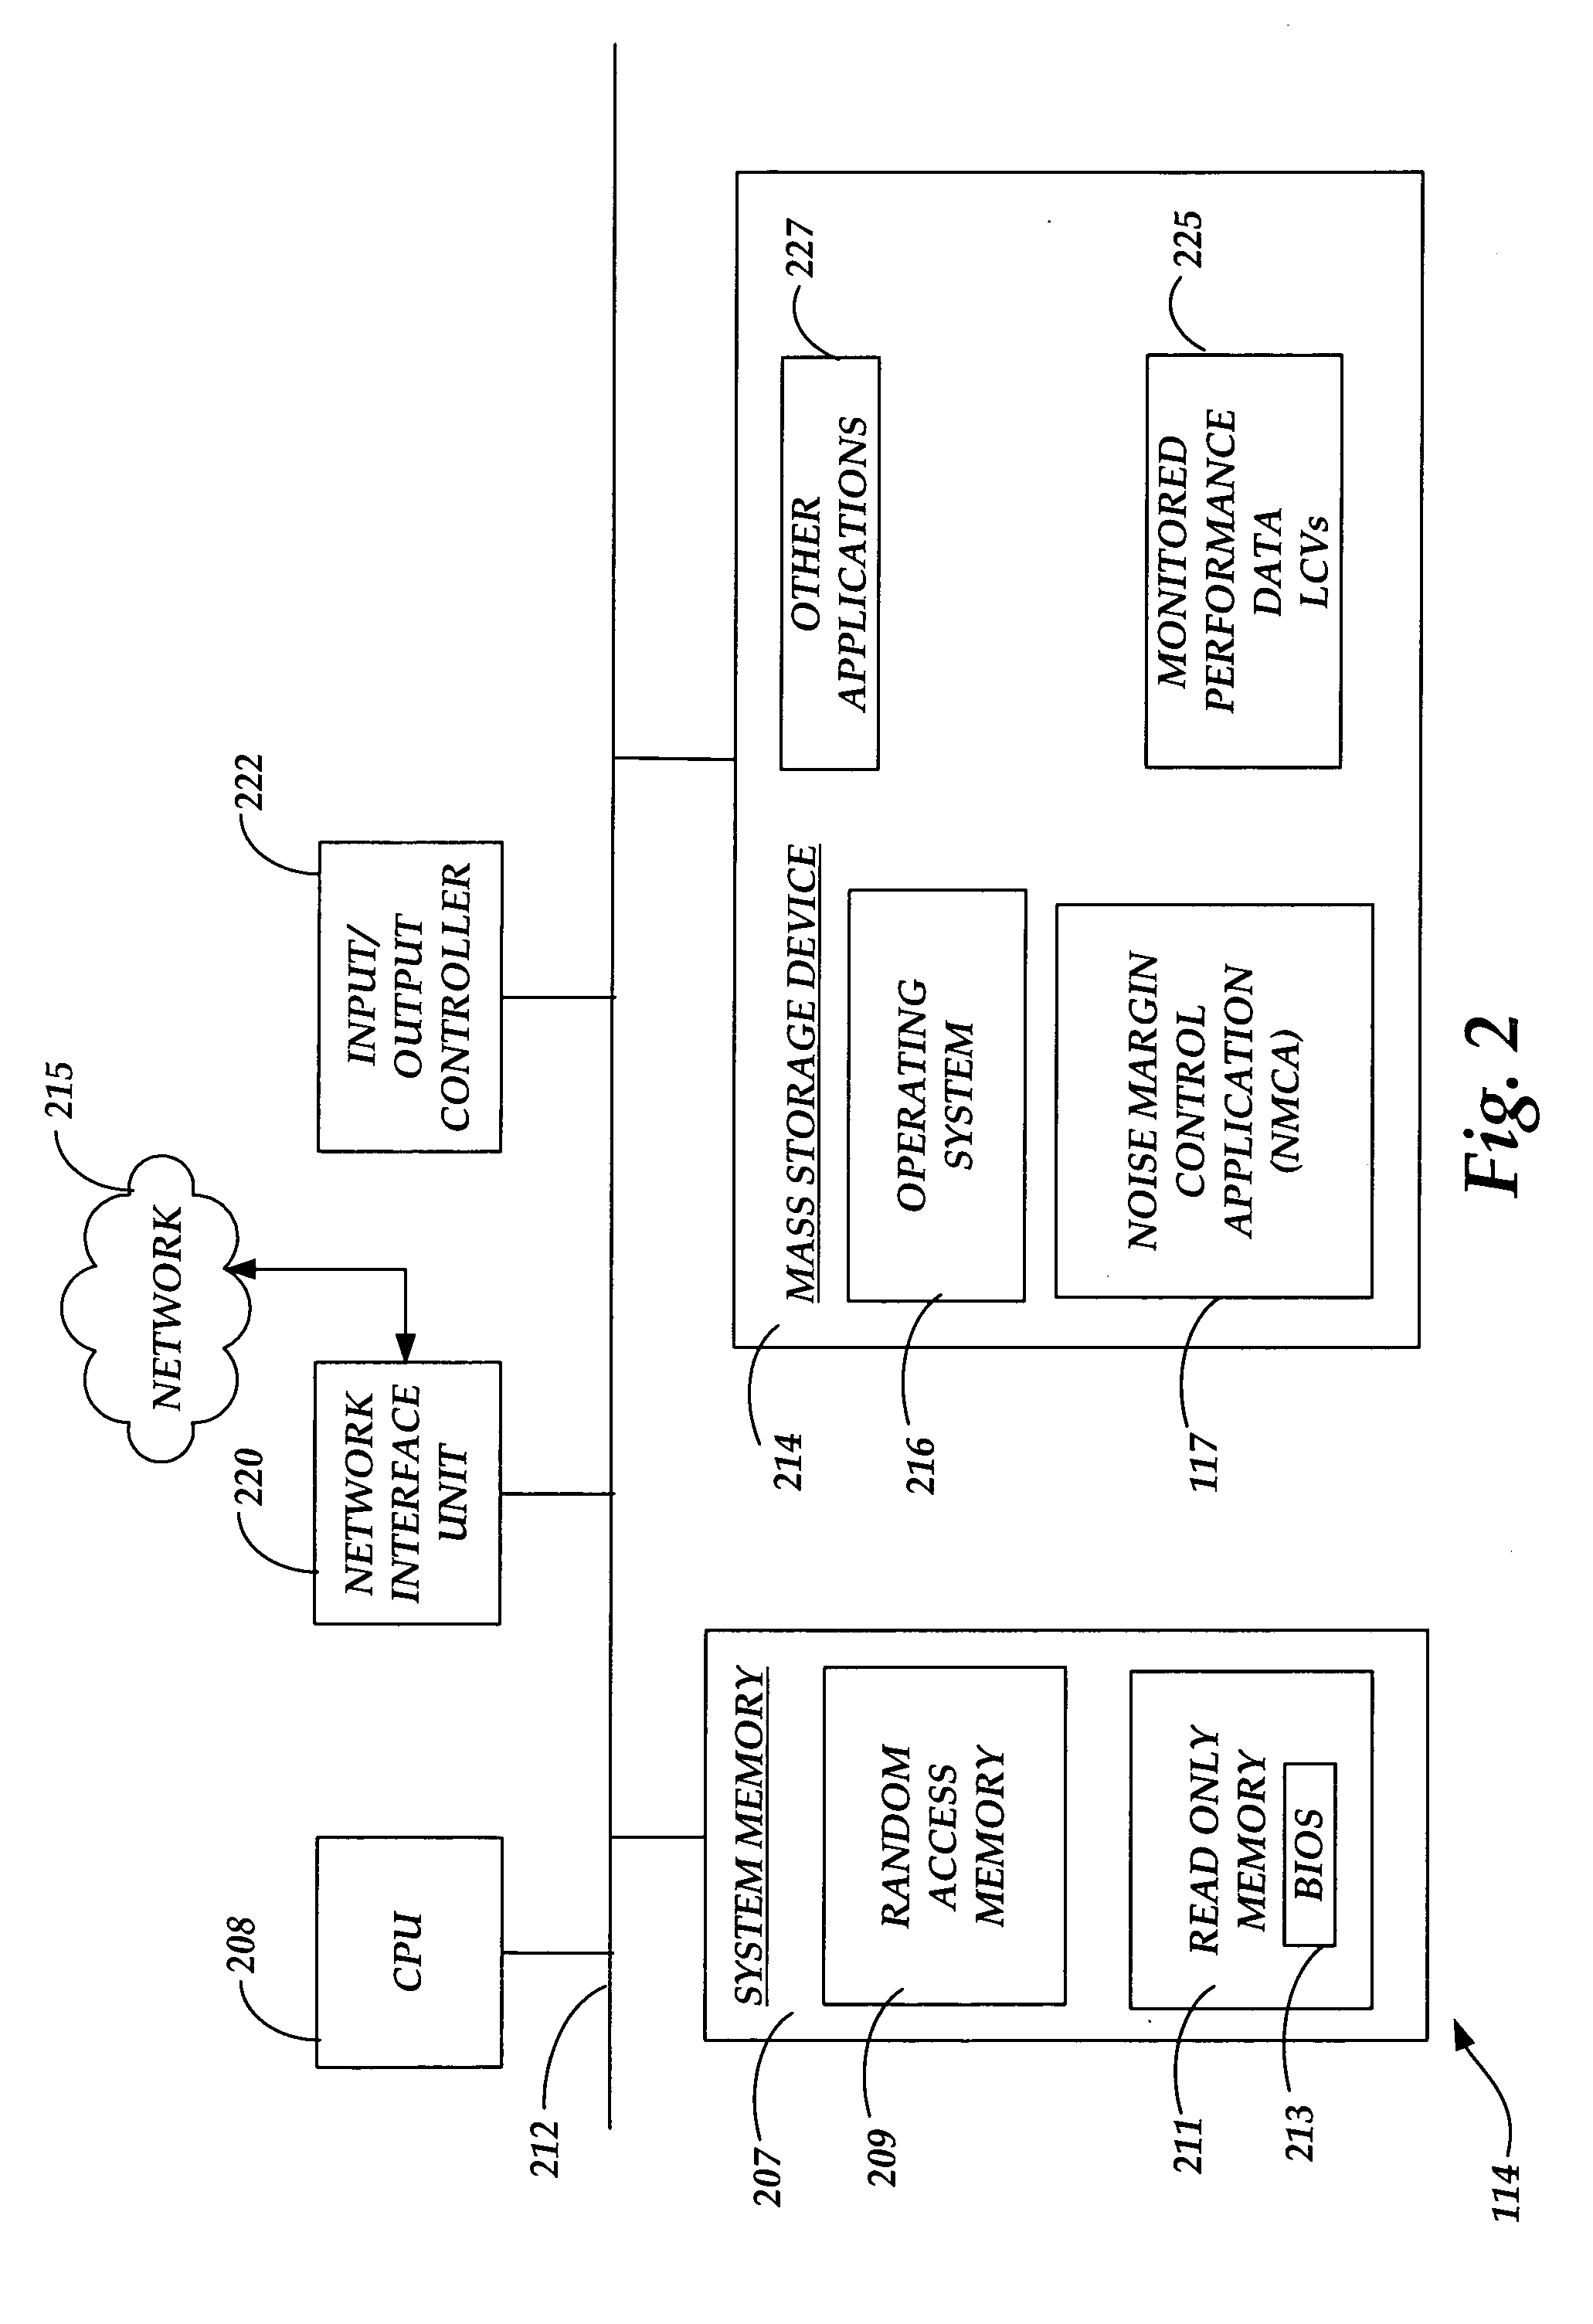 Adaptively applying a target noise margin to a DSL loop for DSL data rate establishment